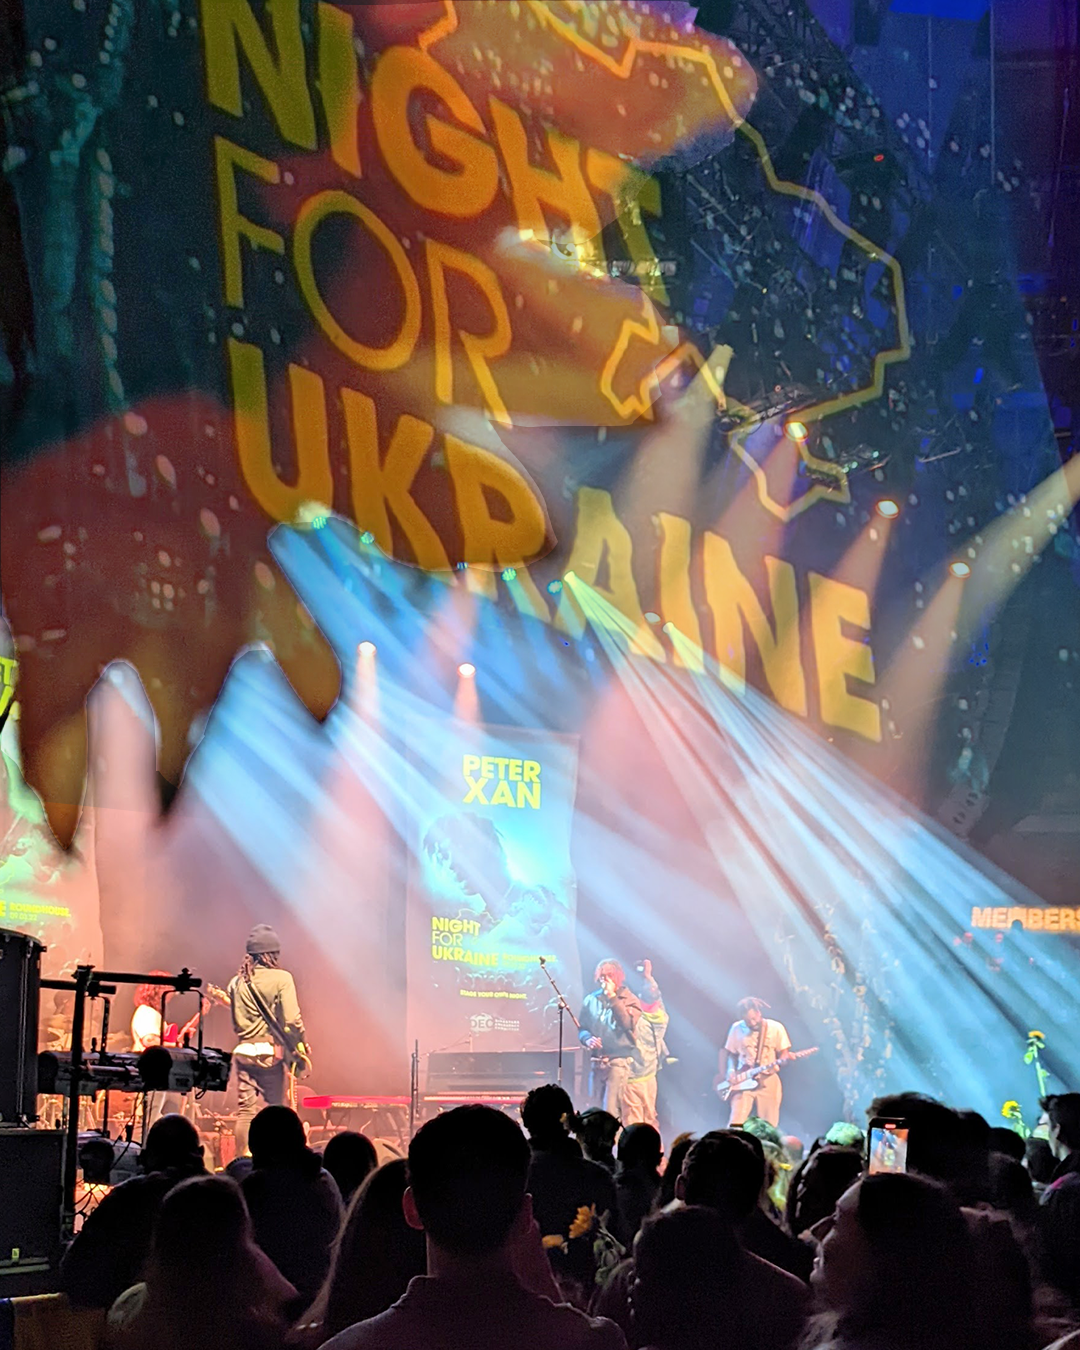 Night for Ukraine at the Roundhouse Camden